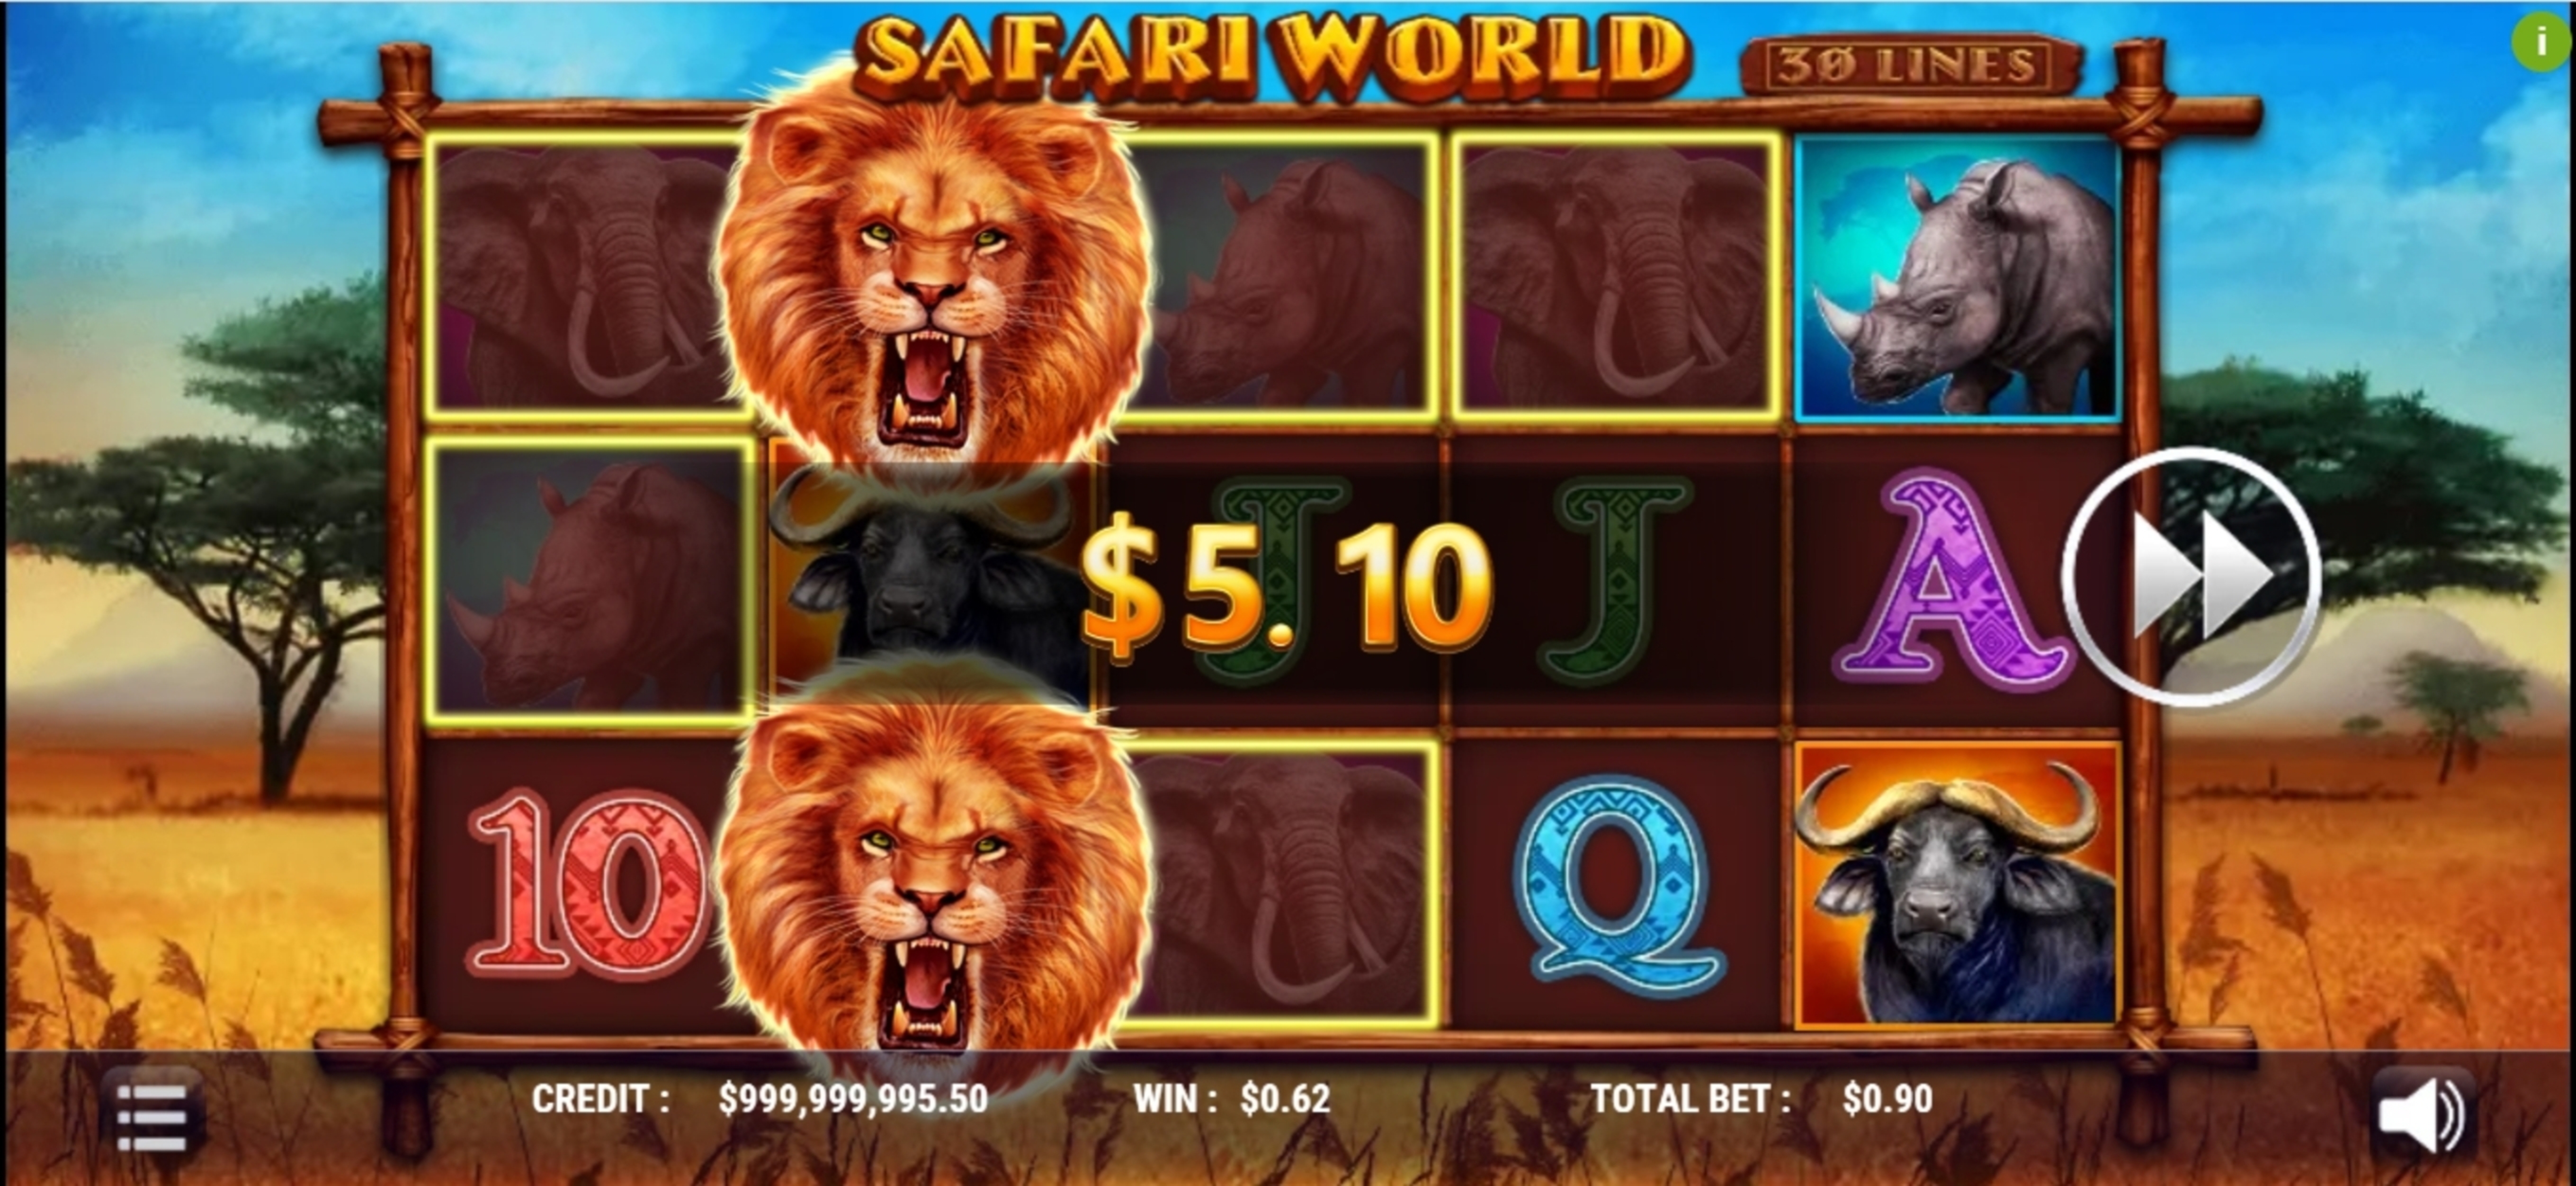 Win Money in Safari World Free Slot Game by Slot Factory